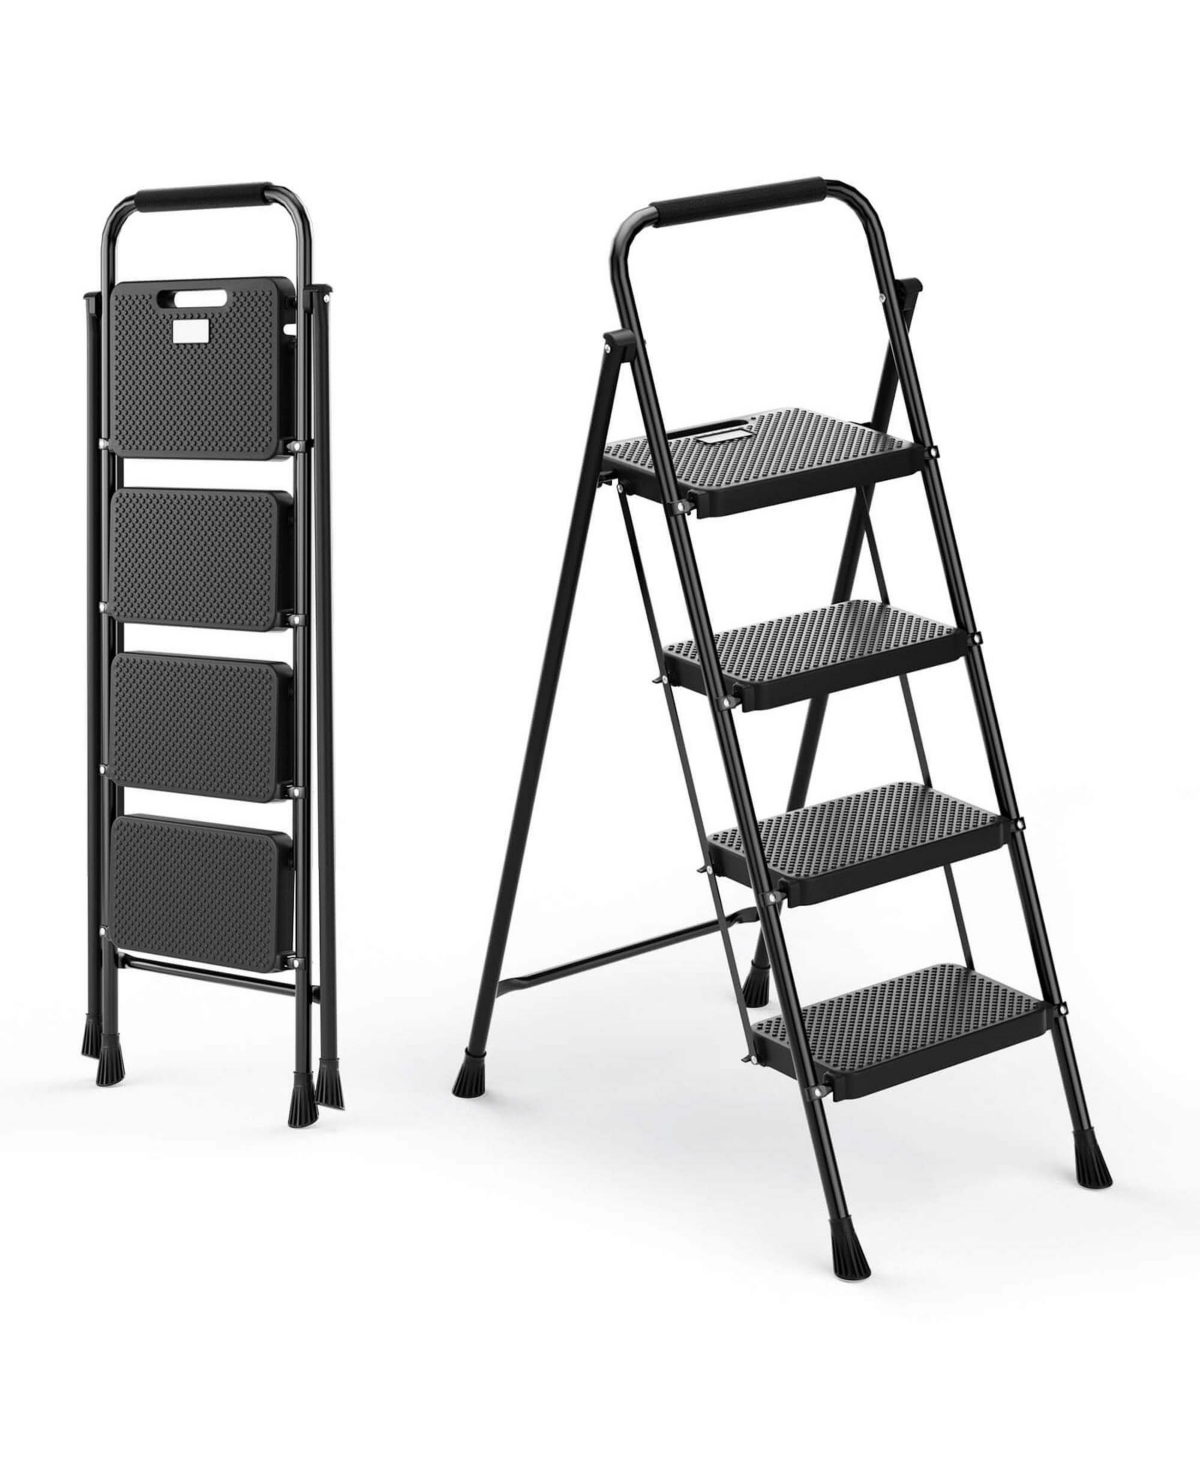 Folding Step Ladder Portable 4 Step Ladder with Safety Handrails & Anti-Slip Pedals - Black